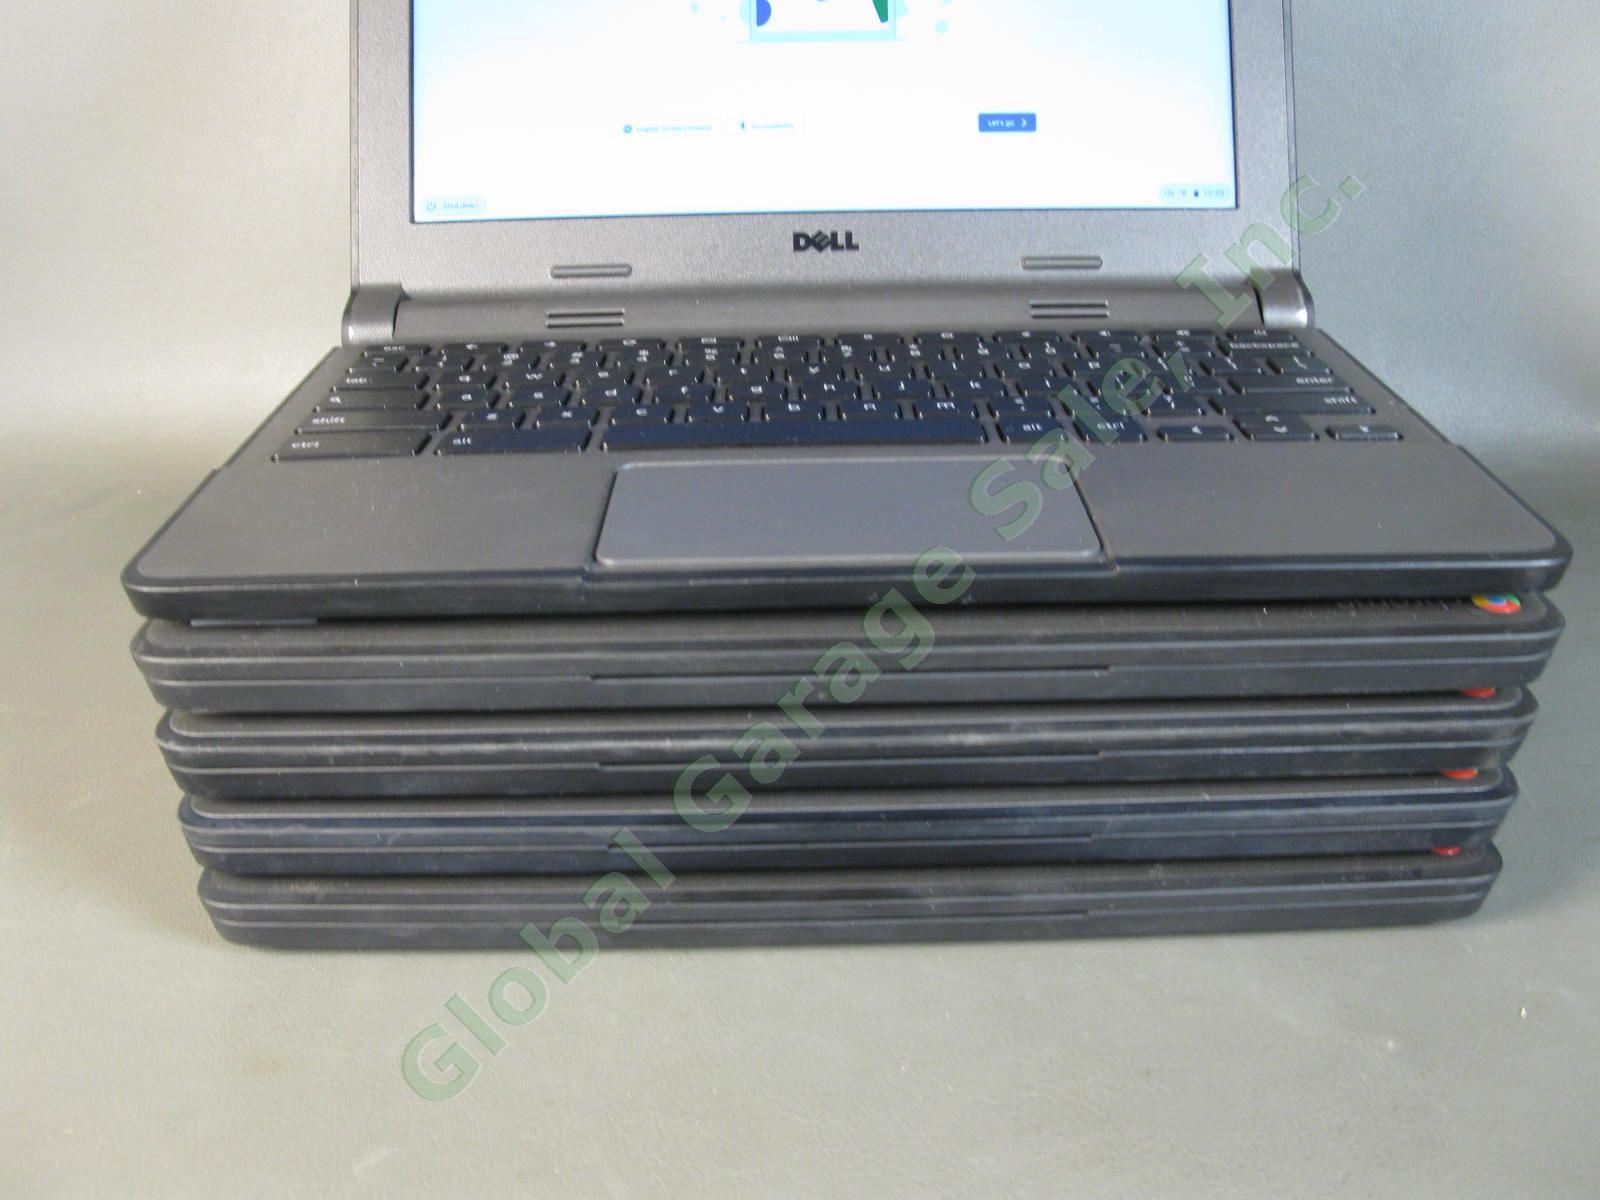 LOT of 5 Dell Chromebook 11 3120 P22T Laptop Computers 16GB SSD 4GB RAM Chargers 1